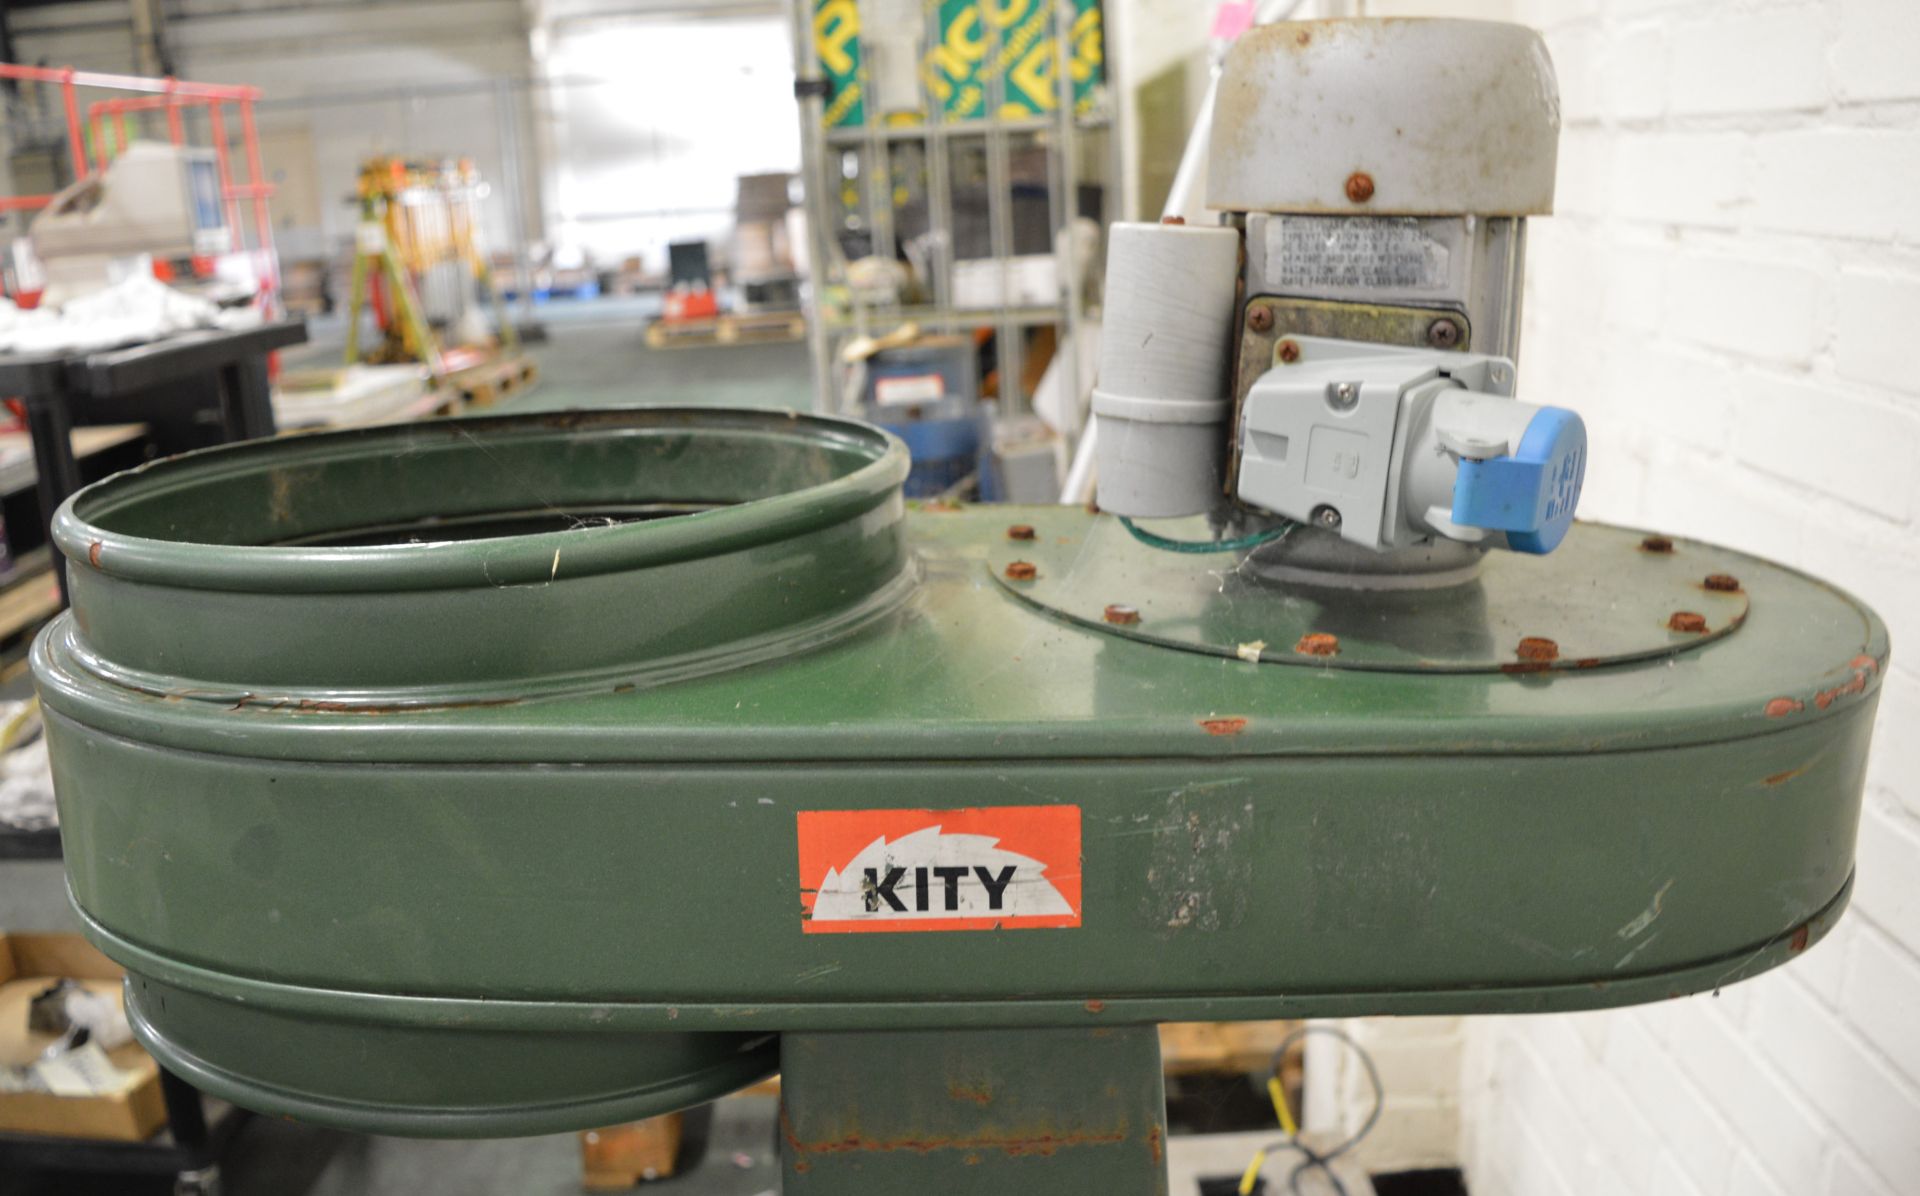 Kity Dust Extractor - 230V. - Image 2 of 3